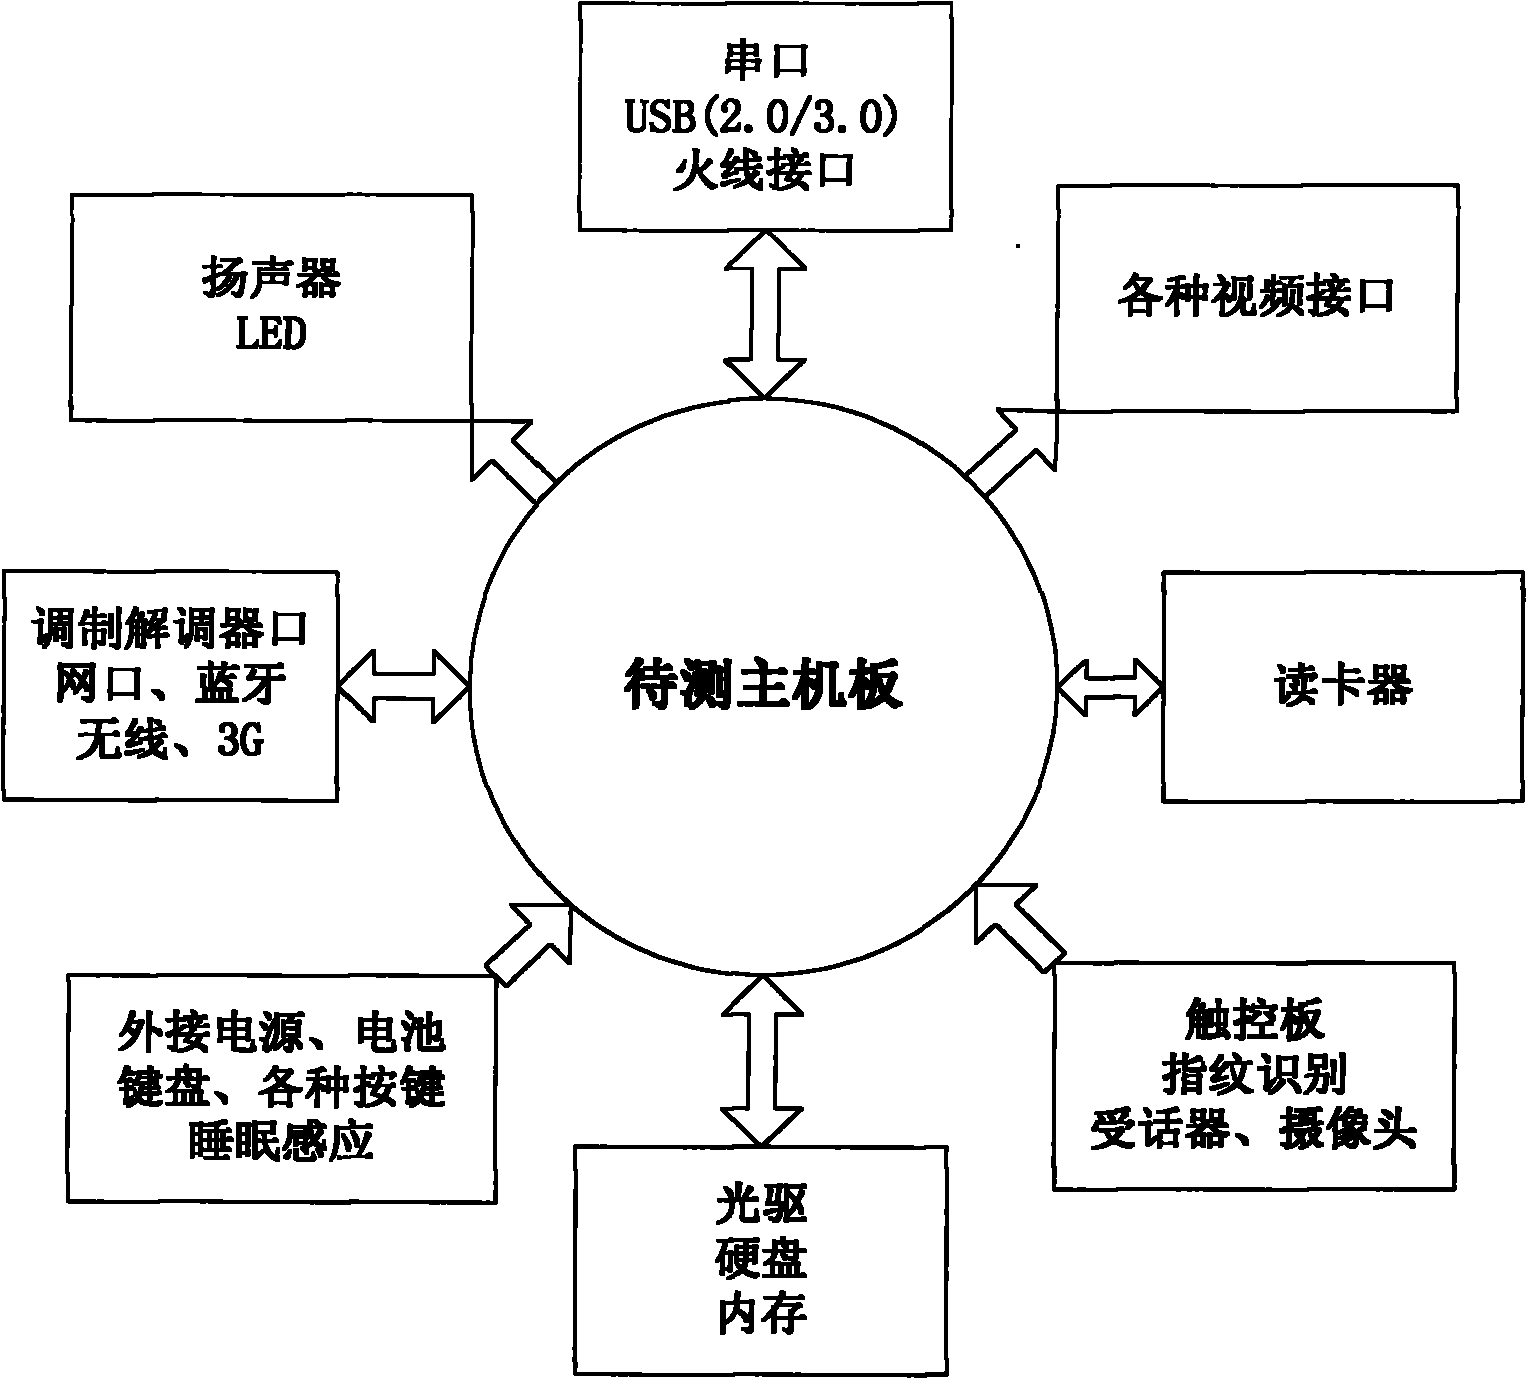 System for automatically testing computer mainboard